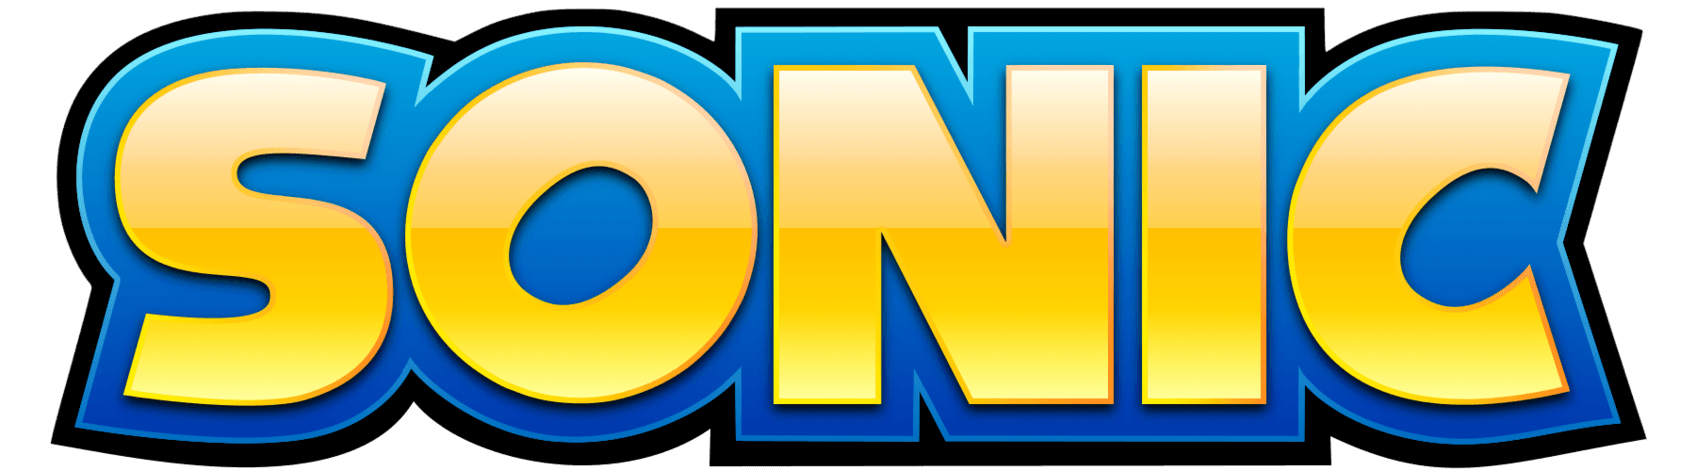 Sonic Logo - Image - Sonic logo lost worlds style by aaronproductions-d6tavka.png ...